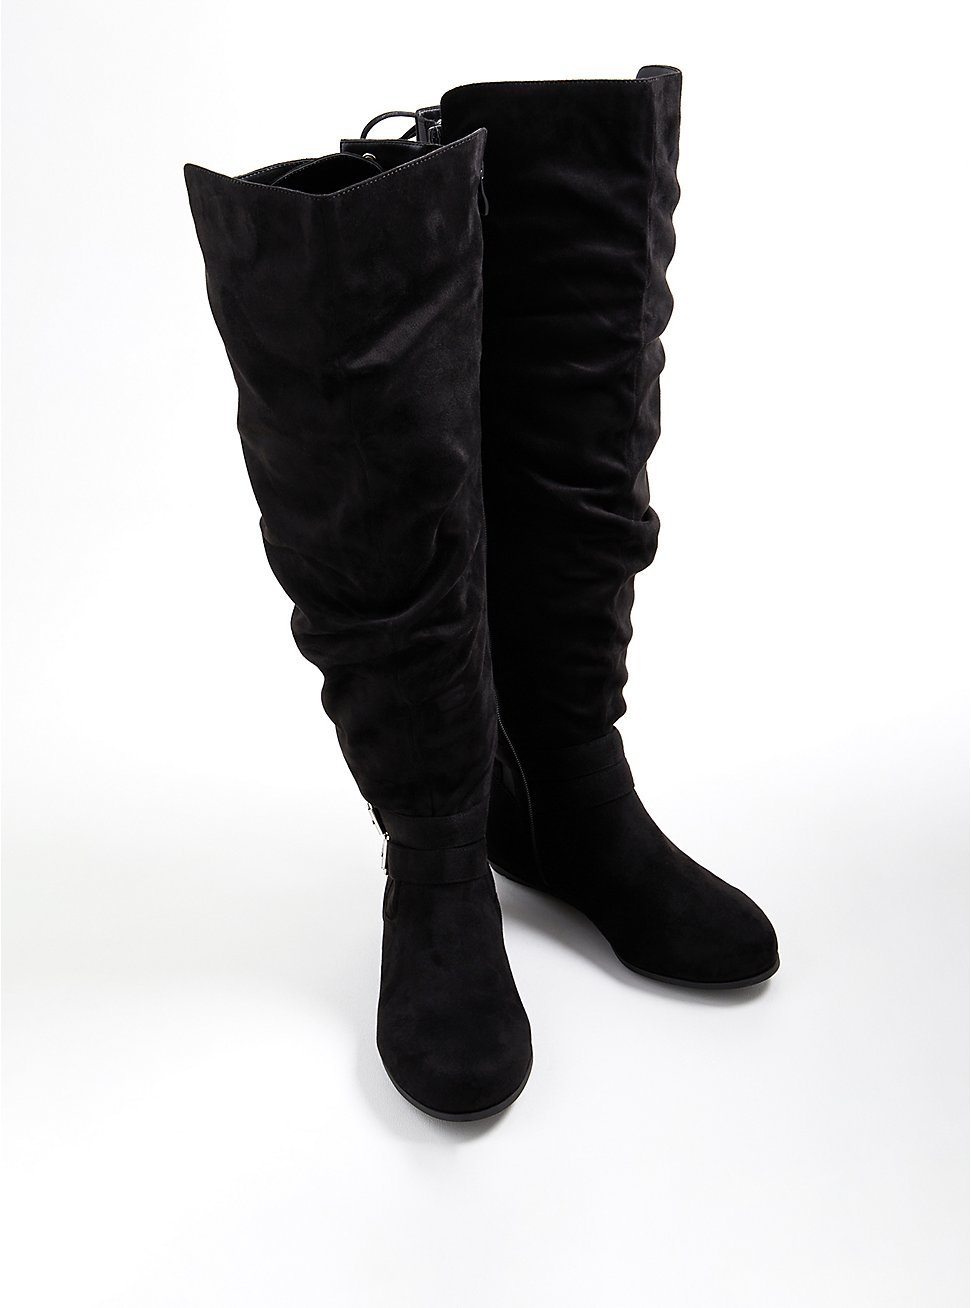 2018 Women Boots Autumn Winter Ladies Fashion Boots Shoes Over The Knee Thigh High Suede Long Boots,Black,7.5 This is not a harm